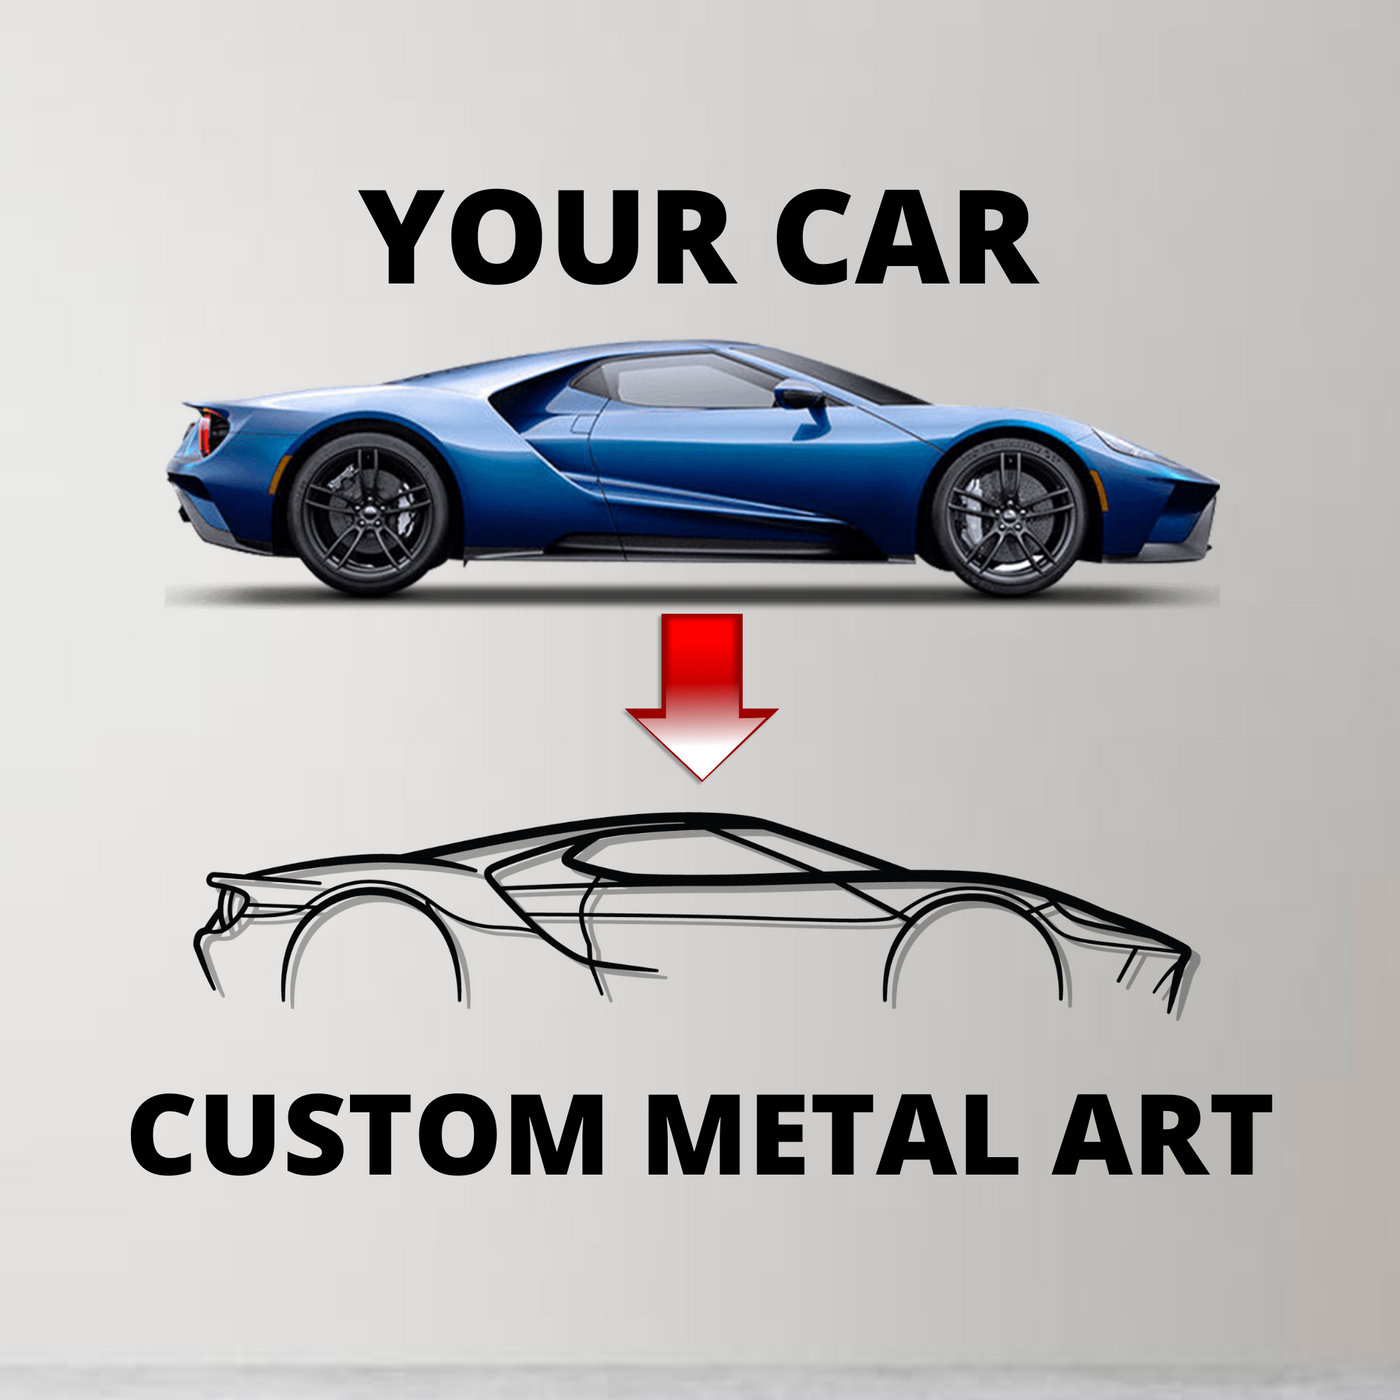 GT3 RS model 997 Detailed Silhouette Metal Wall Art